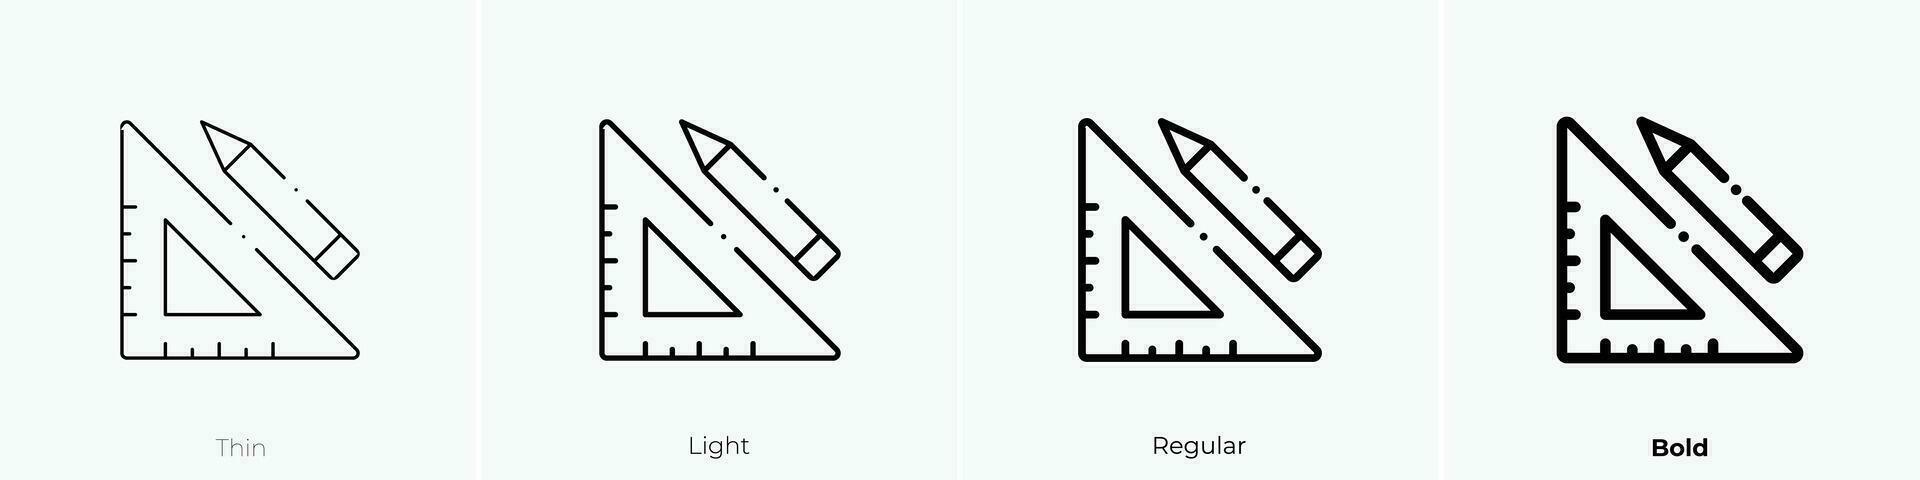 tool icon. Thin, Light, Regular And Bold style design isolated on white background vector